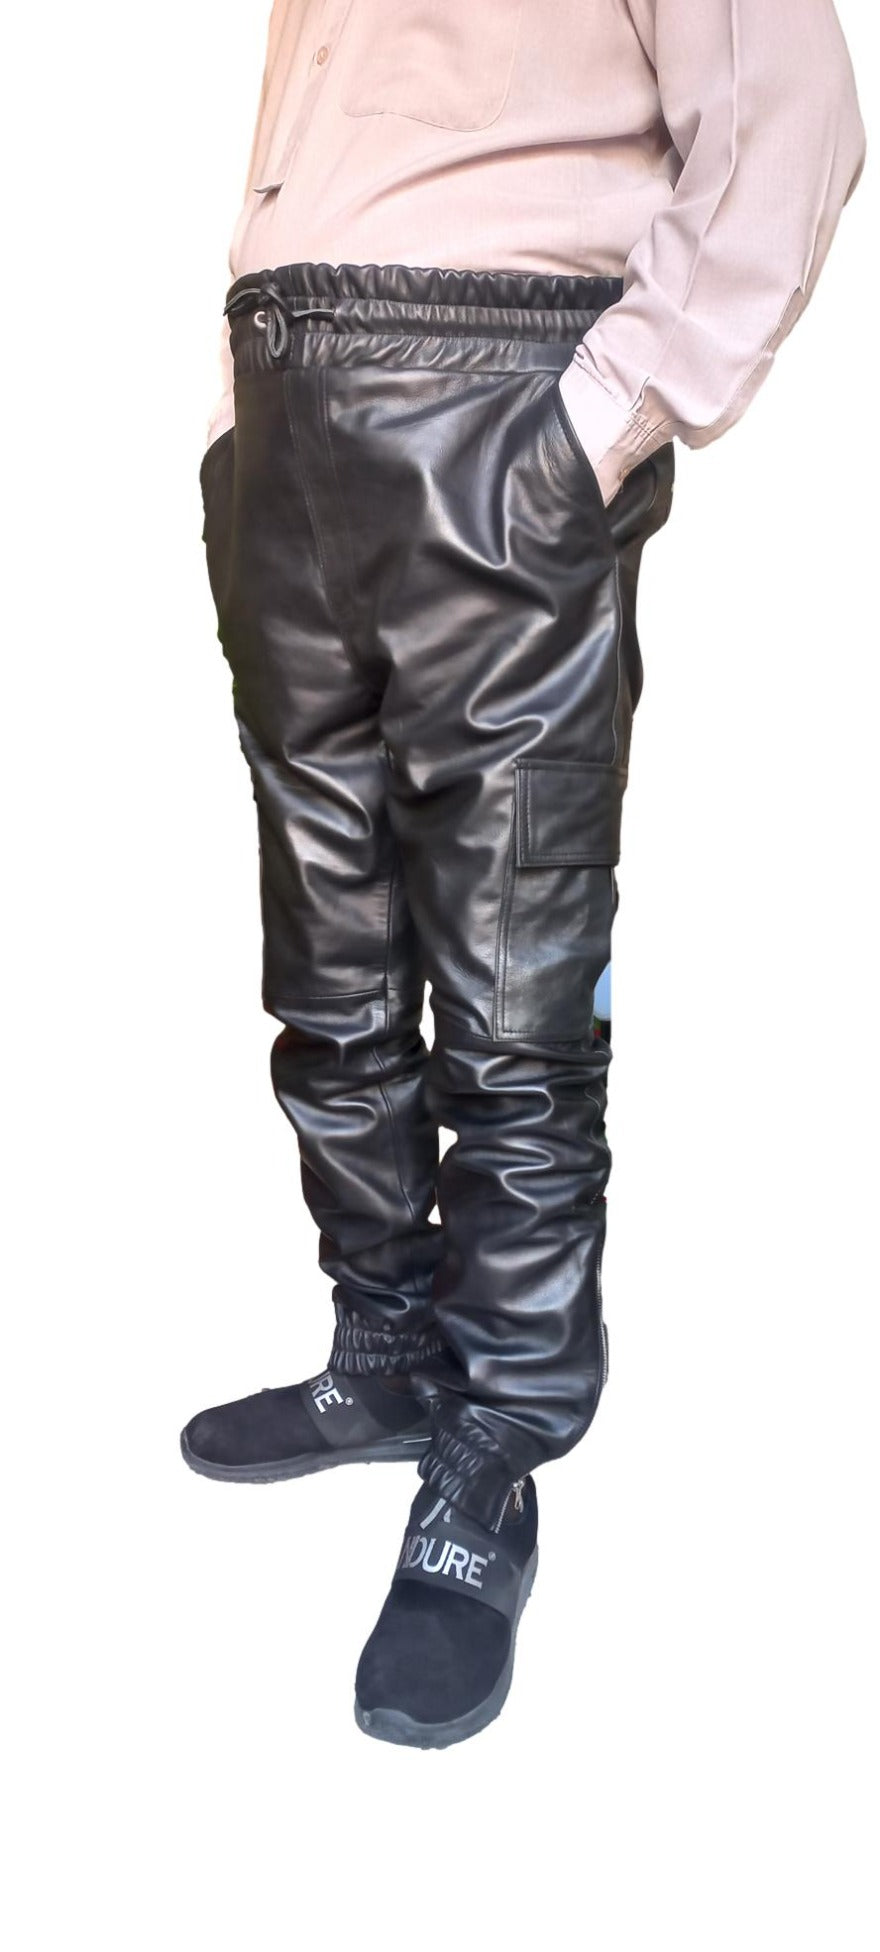 Mens Leather Clothing.- ChersDelights Leather Apparel